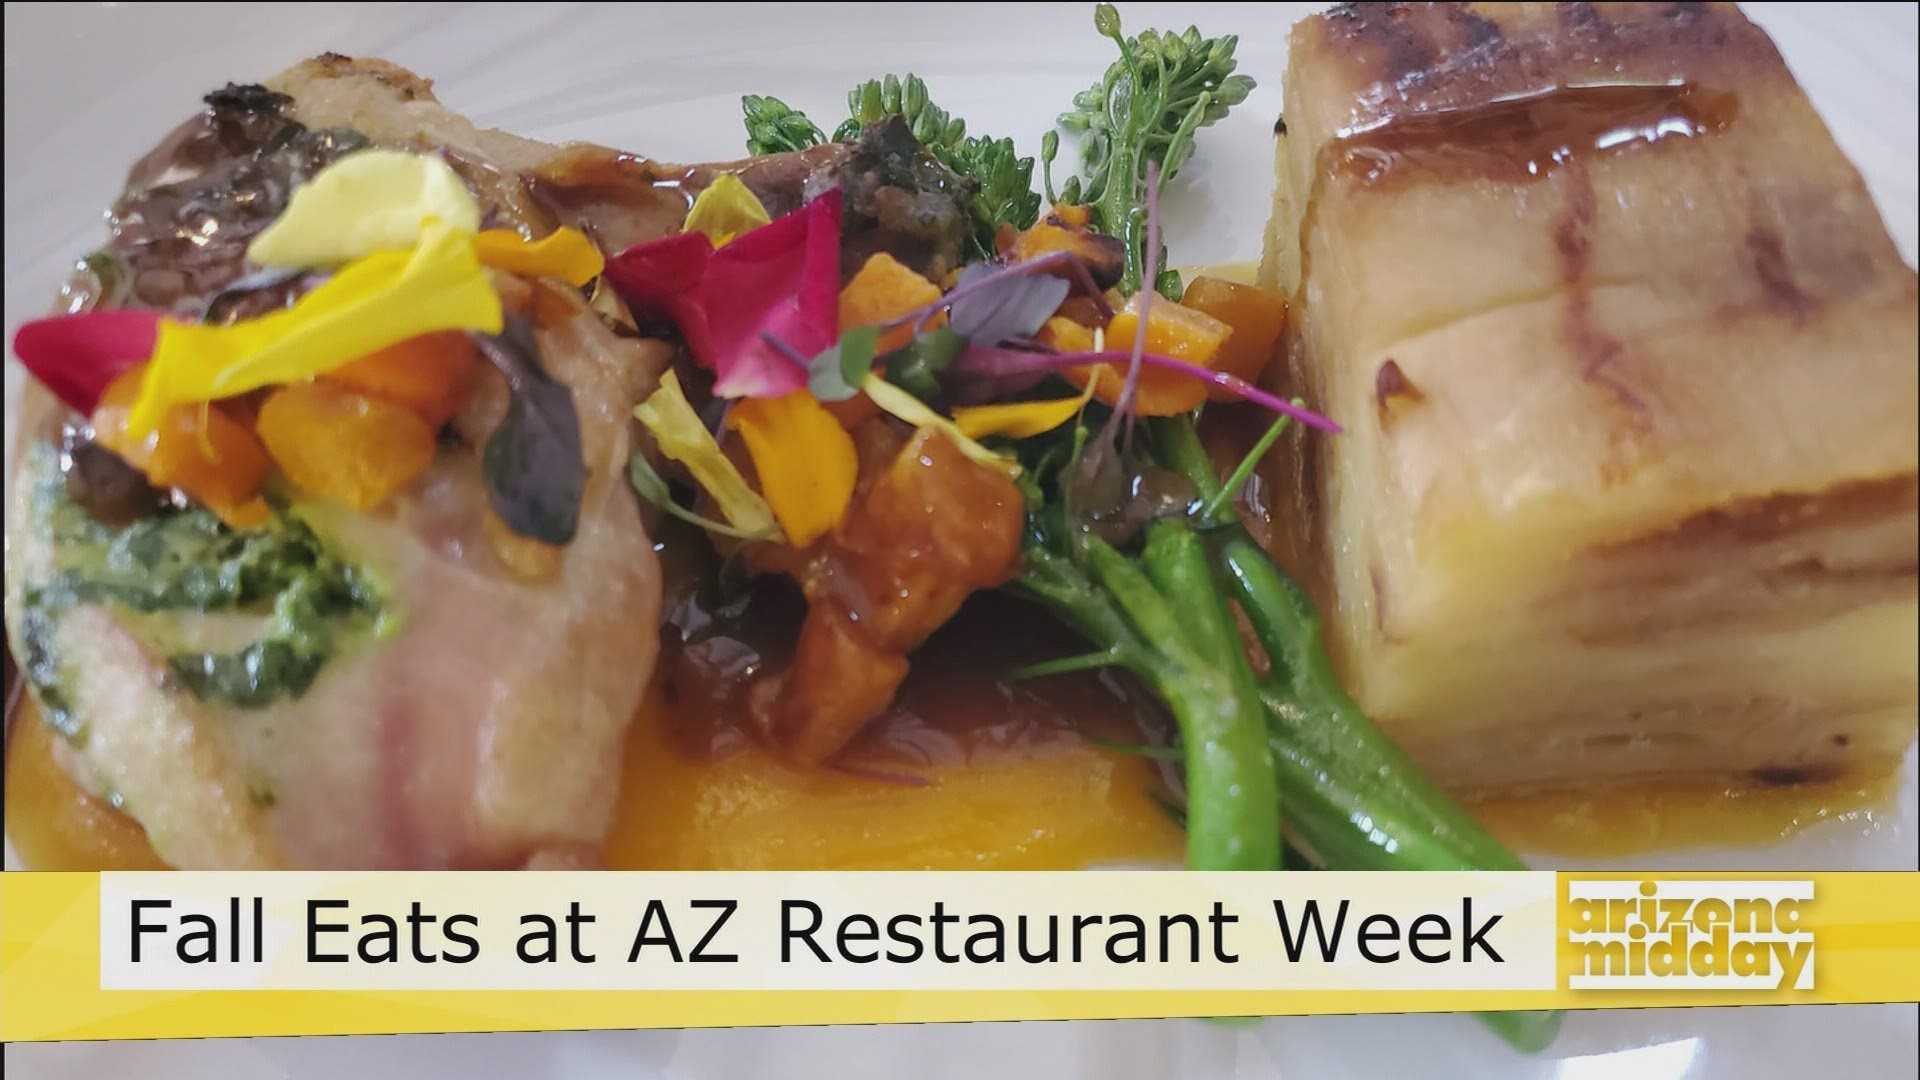 Chef Lee Hillson from T'Cooks at Royal Palms shows us the amazing meal to try during this week's Restaurant Week